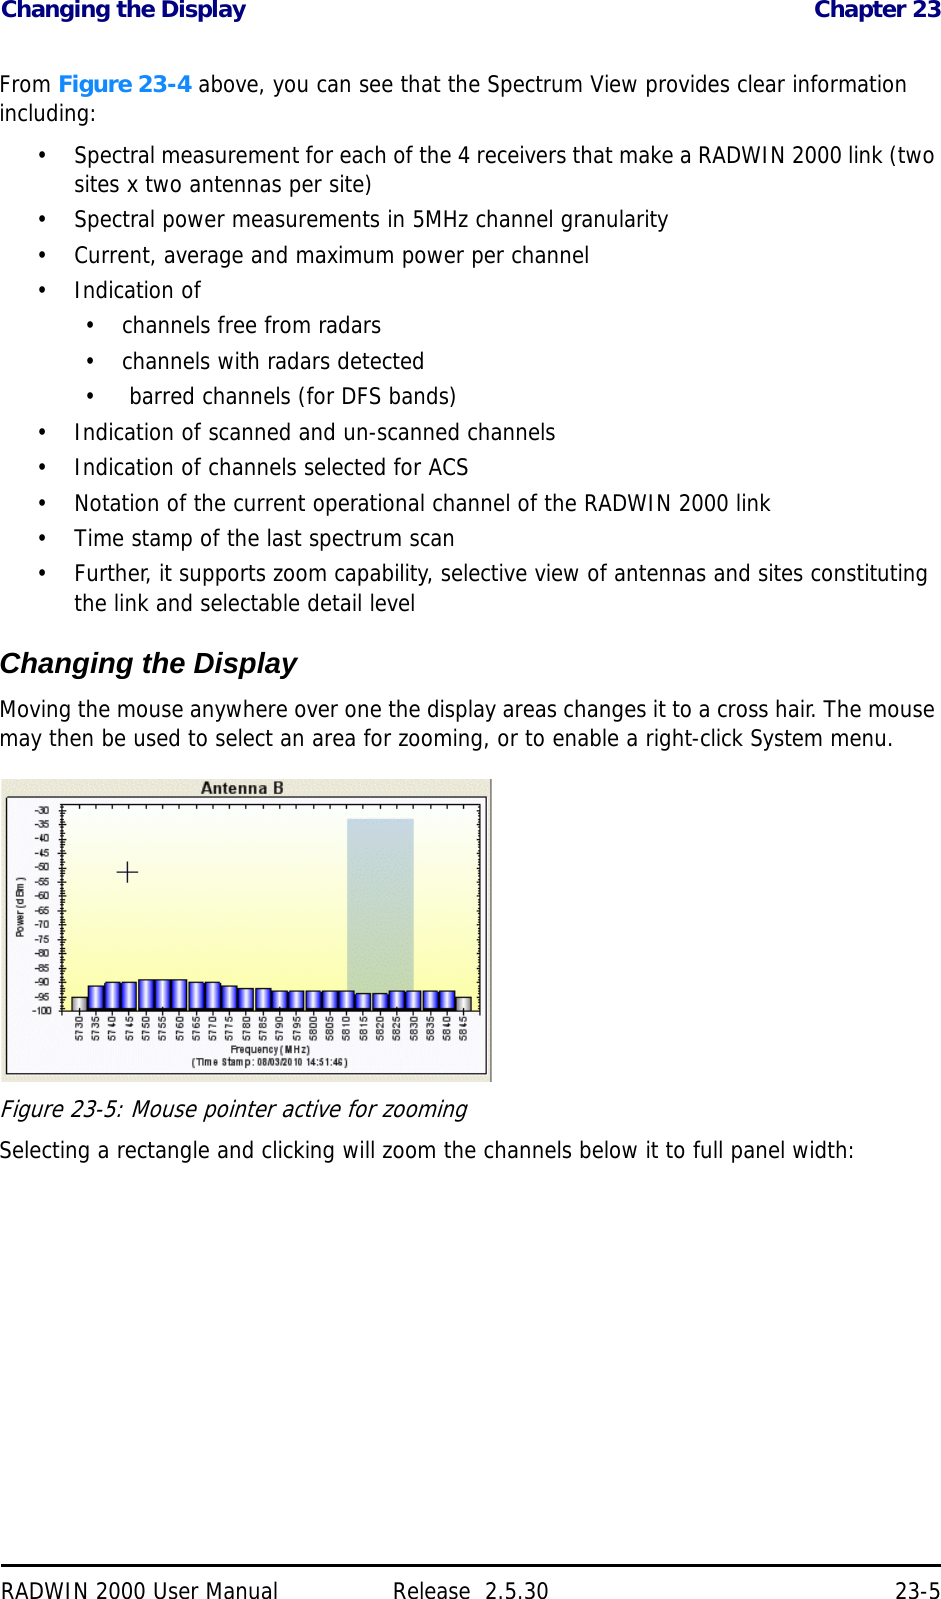 Changing the Display Chapter 23RADWIN 2000 User Manual Release  2.5.30 23-5From Figure 23-4 above, you can see that the Spectrum View provides clear information including:• Spectral measurement for each of the 4 receivers that make a RADWIN 2000 link (two sites x two antennas per site)• Spectral power measurements in 5MHz channel granularity• Current, average and maximum power per channel• Indication of • channels free from radars• channels with radars detected•  barred channels (for DFS bands)• Indication of scanned and un-scanned channels• Indication of channels selected for ACS• Notation of the current operational channel of the RADWIN 2000 link• Time stamp of the last spectrum scan• Further, it supports zoom capability, selective view of antennas and sites constituting the link and selectable detail levelChanging the DisplayMoving the mouse anywhere over one the display areas changes it to a cross hair. The mouse may then be used to select an area for zooming, or to enable a right-click System menu.Figure 23-5: Mouse pointer active for zoomingSelecting a rectangle and clicking will zoom the channels below it to full panel width: